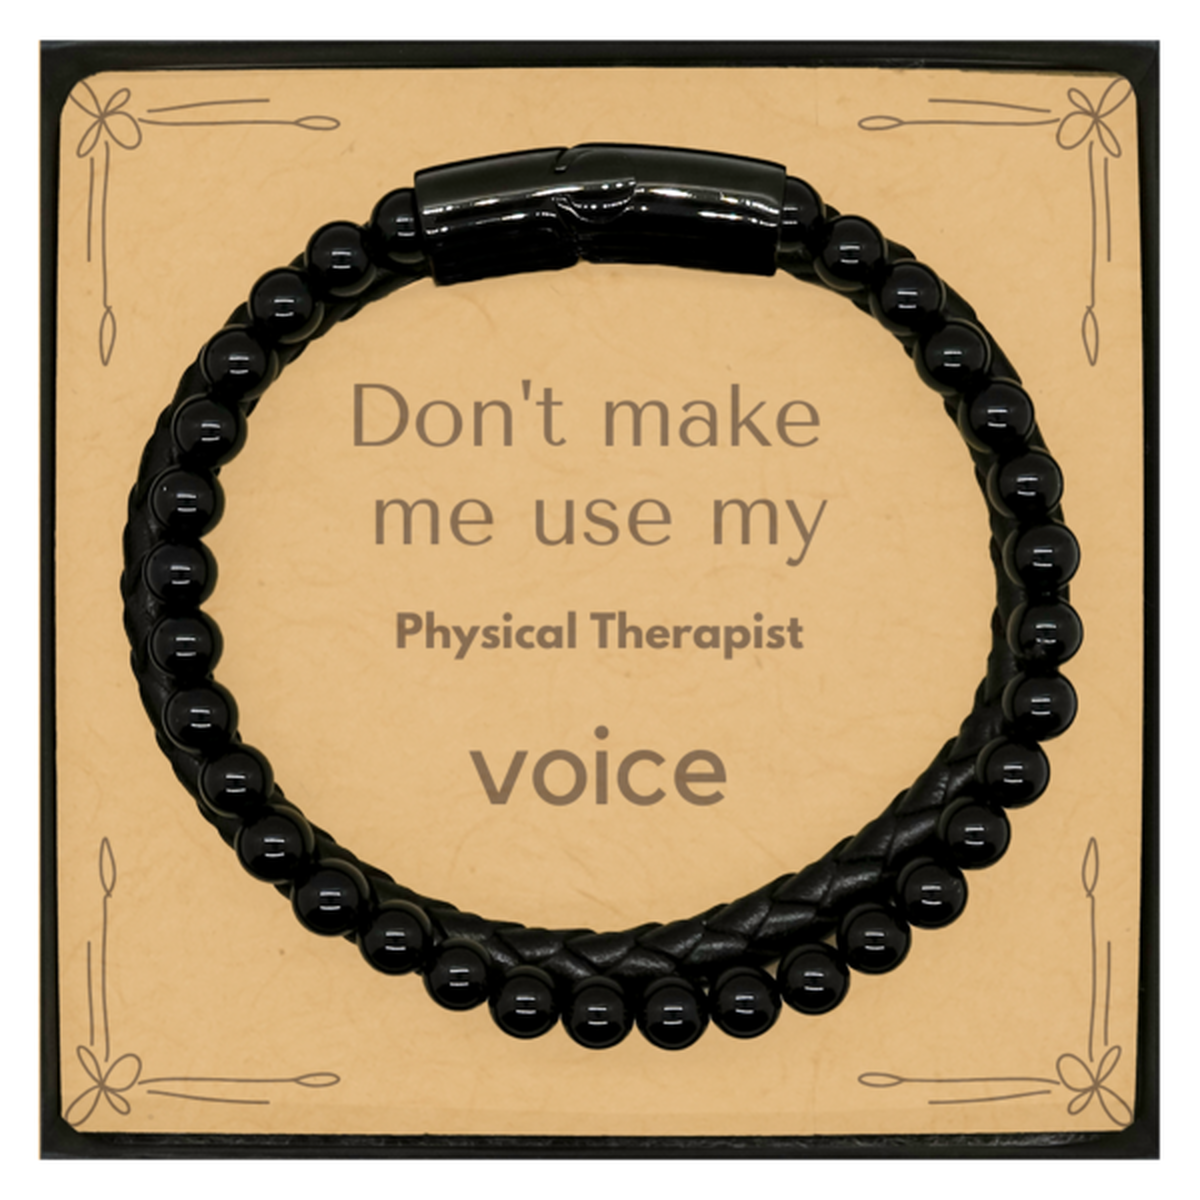 Don't make me use my Physical Therapist voice, Sarcasm Physical Therapist Card Gifts, Christmas Physical Therapist Stone Leather Bracelets Birthday Unique Gifts For Physical Therapist Coworkers, Men, Women, Colleague, Friends